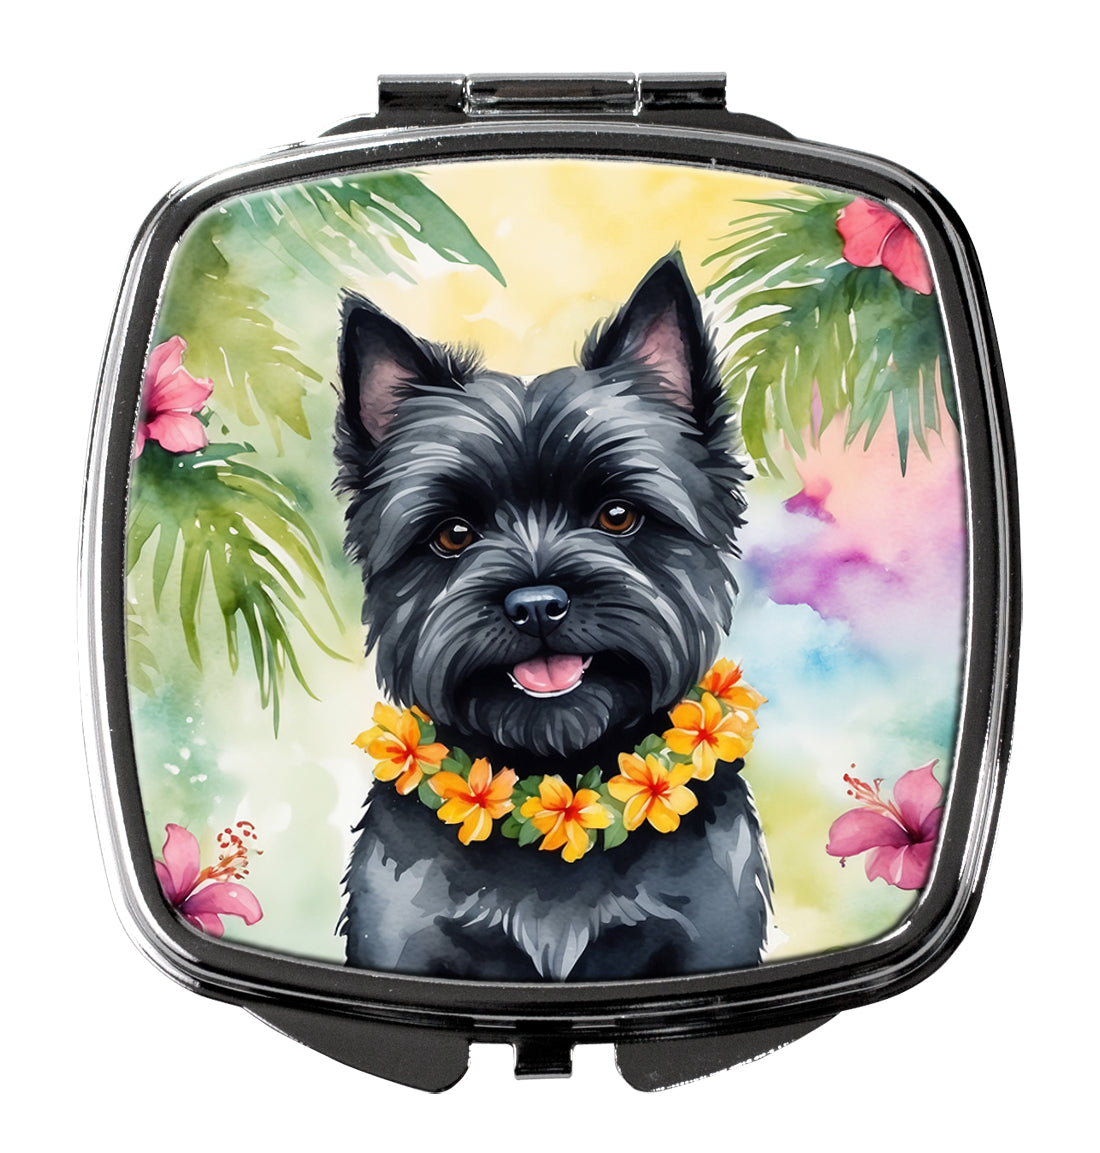 Buy this Cairn Terrier Luau Compact Mirror